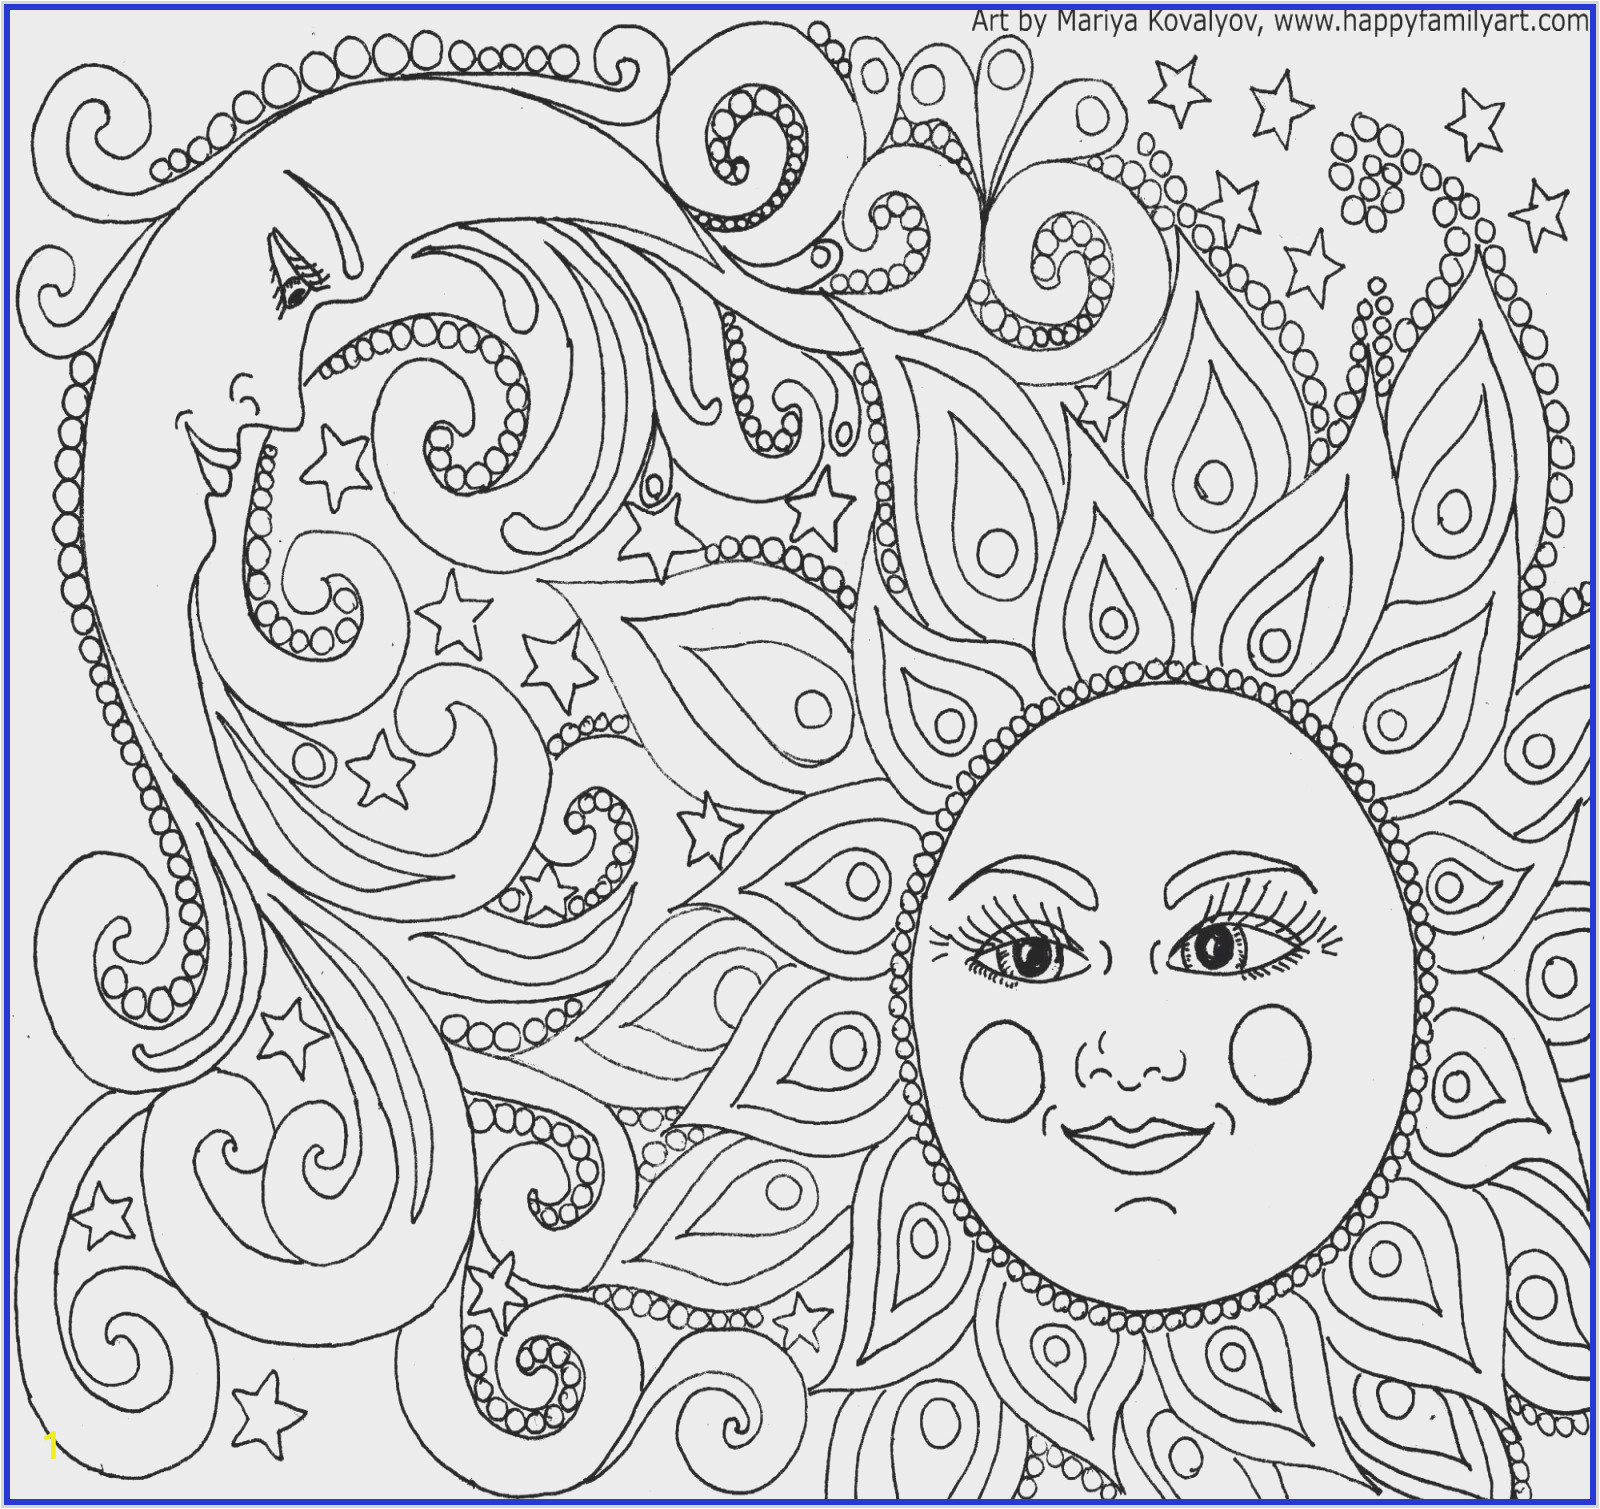 october coloring pages printable